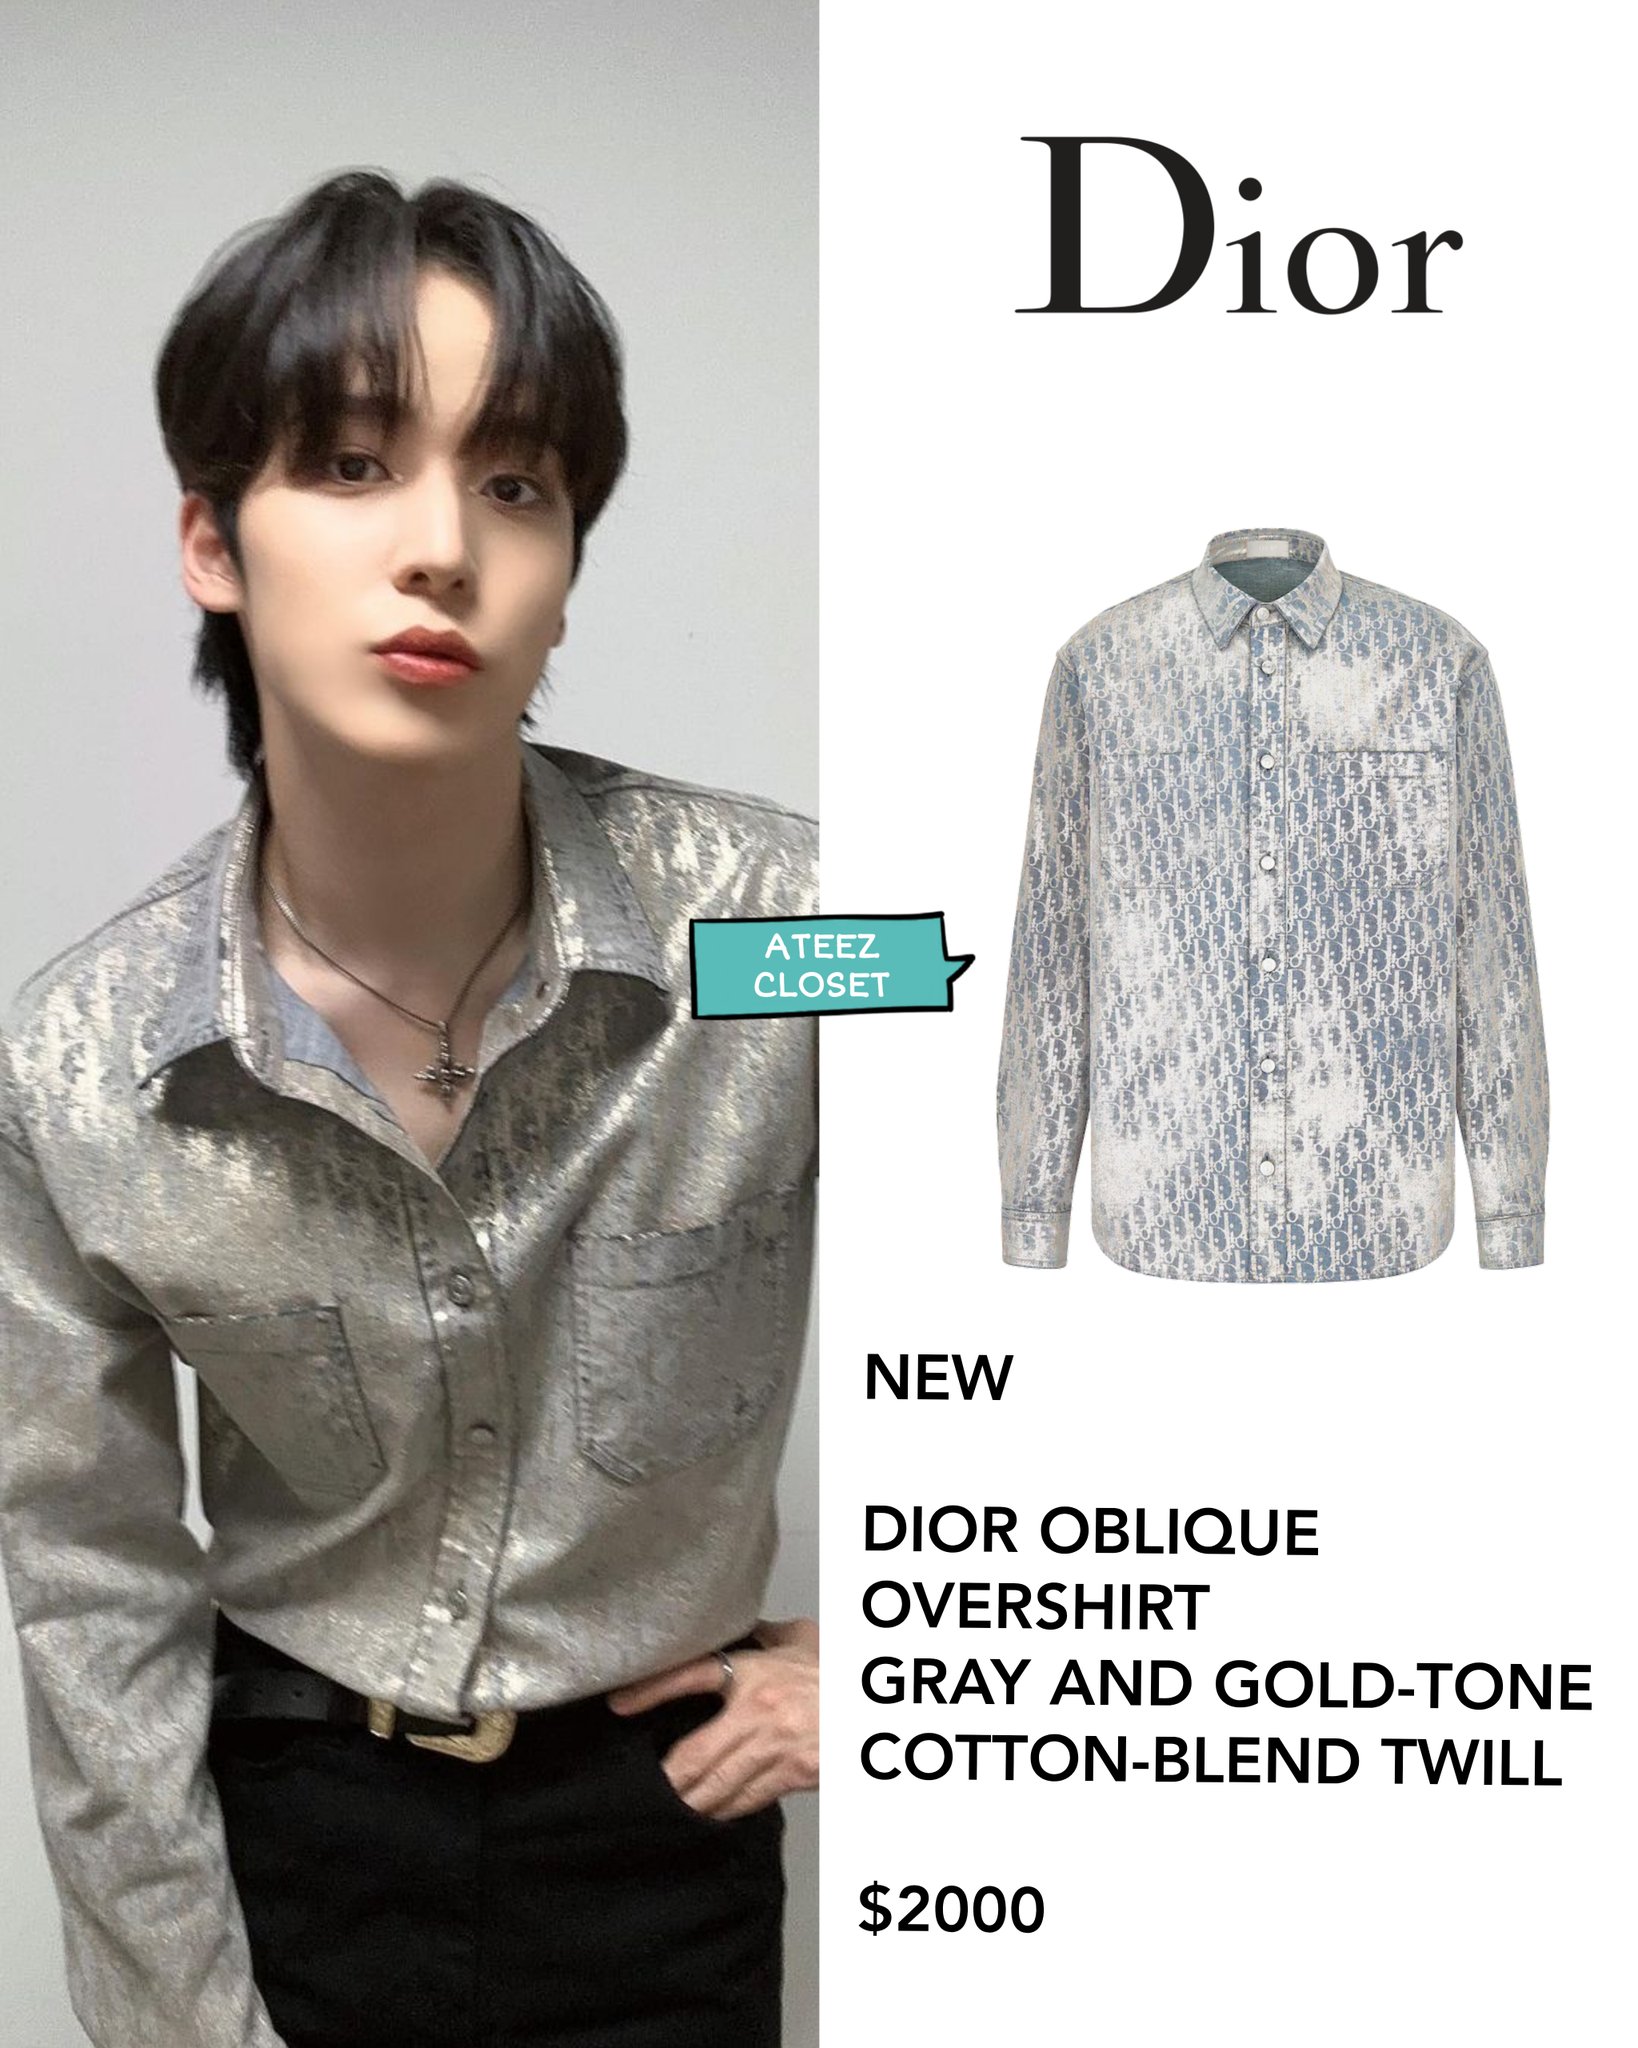 Dior Oblique Overshirt Gray and Gold-Tone Cotton-Blend Twill